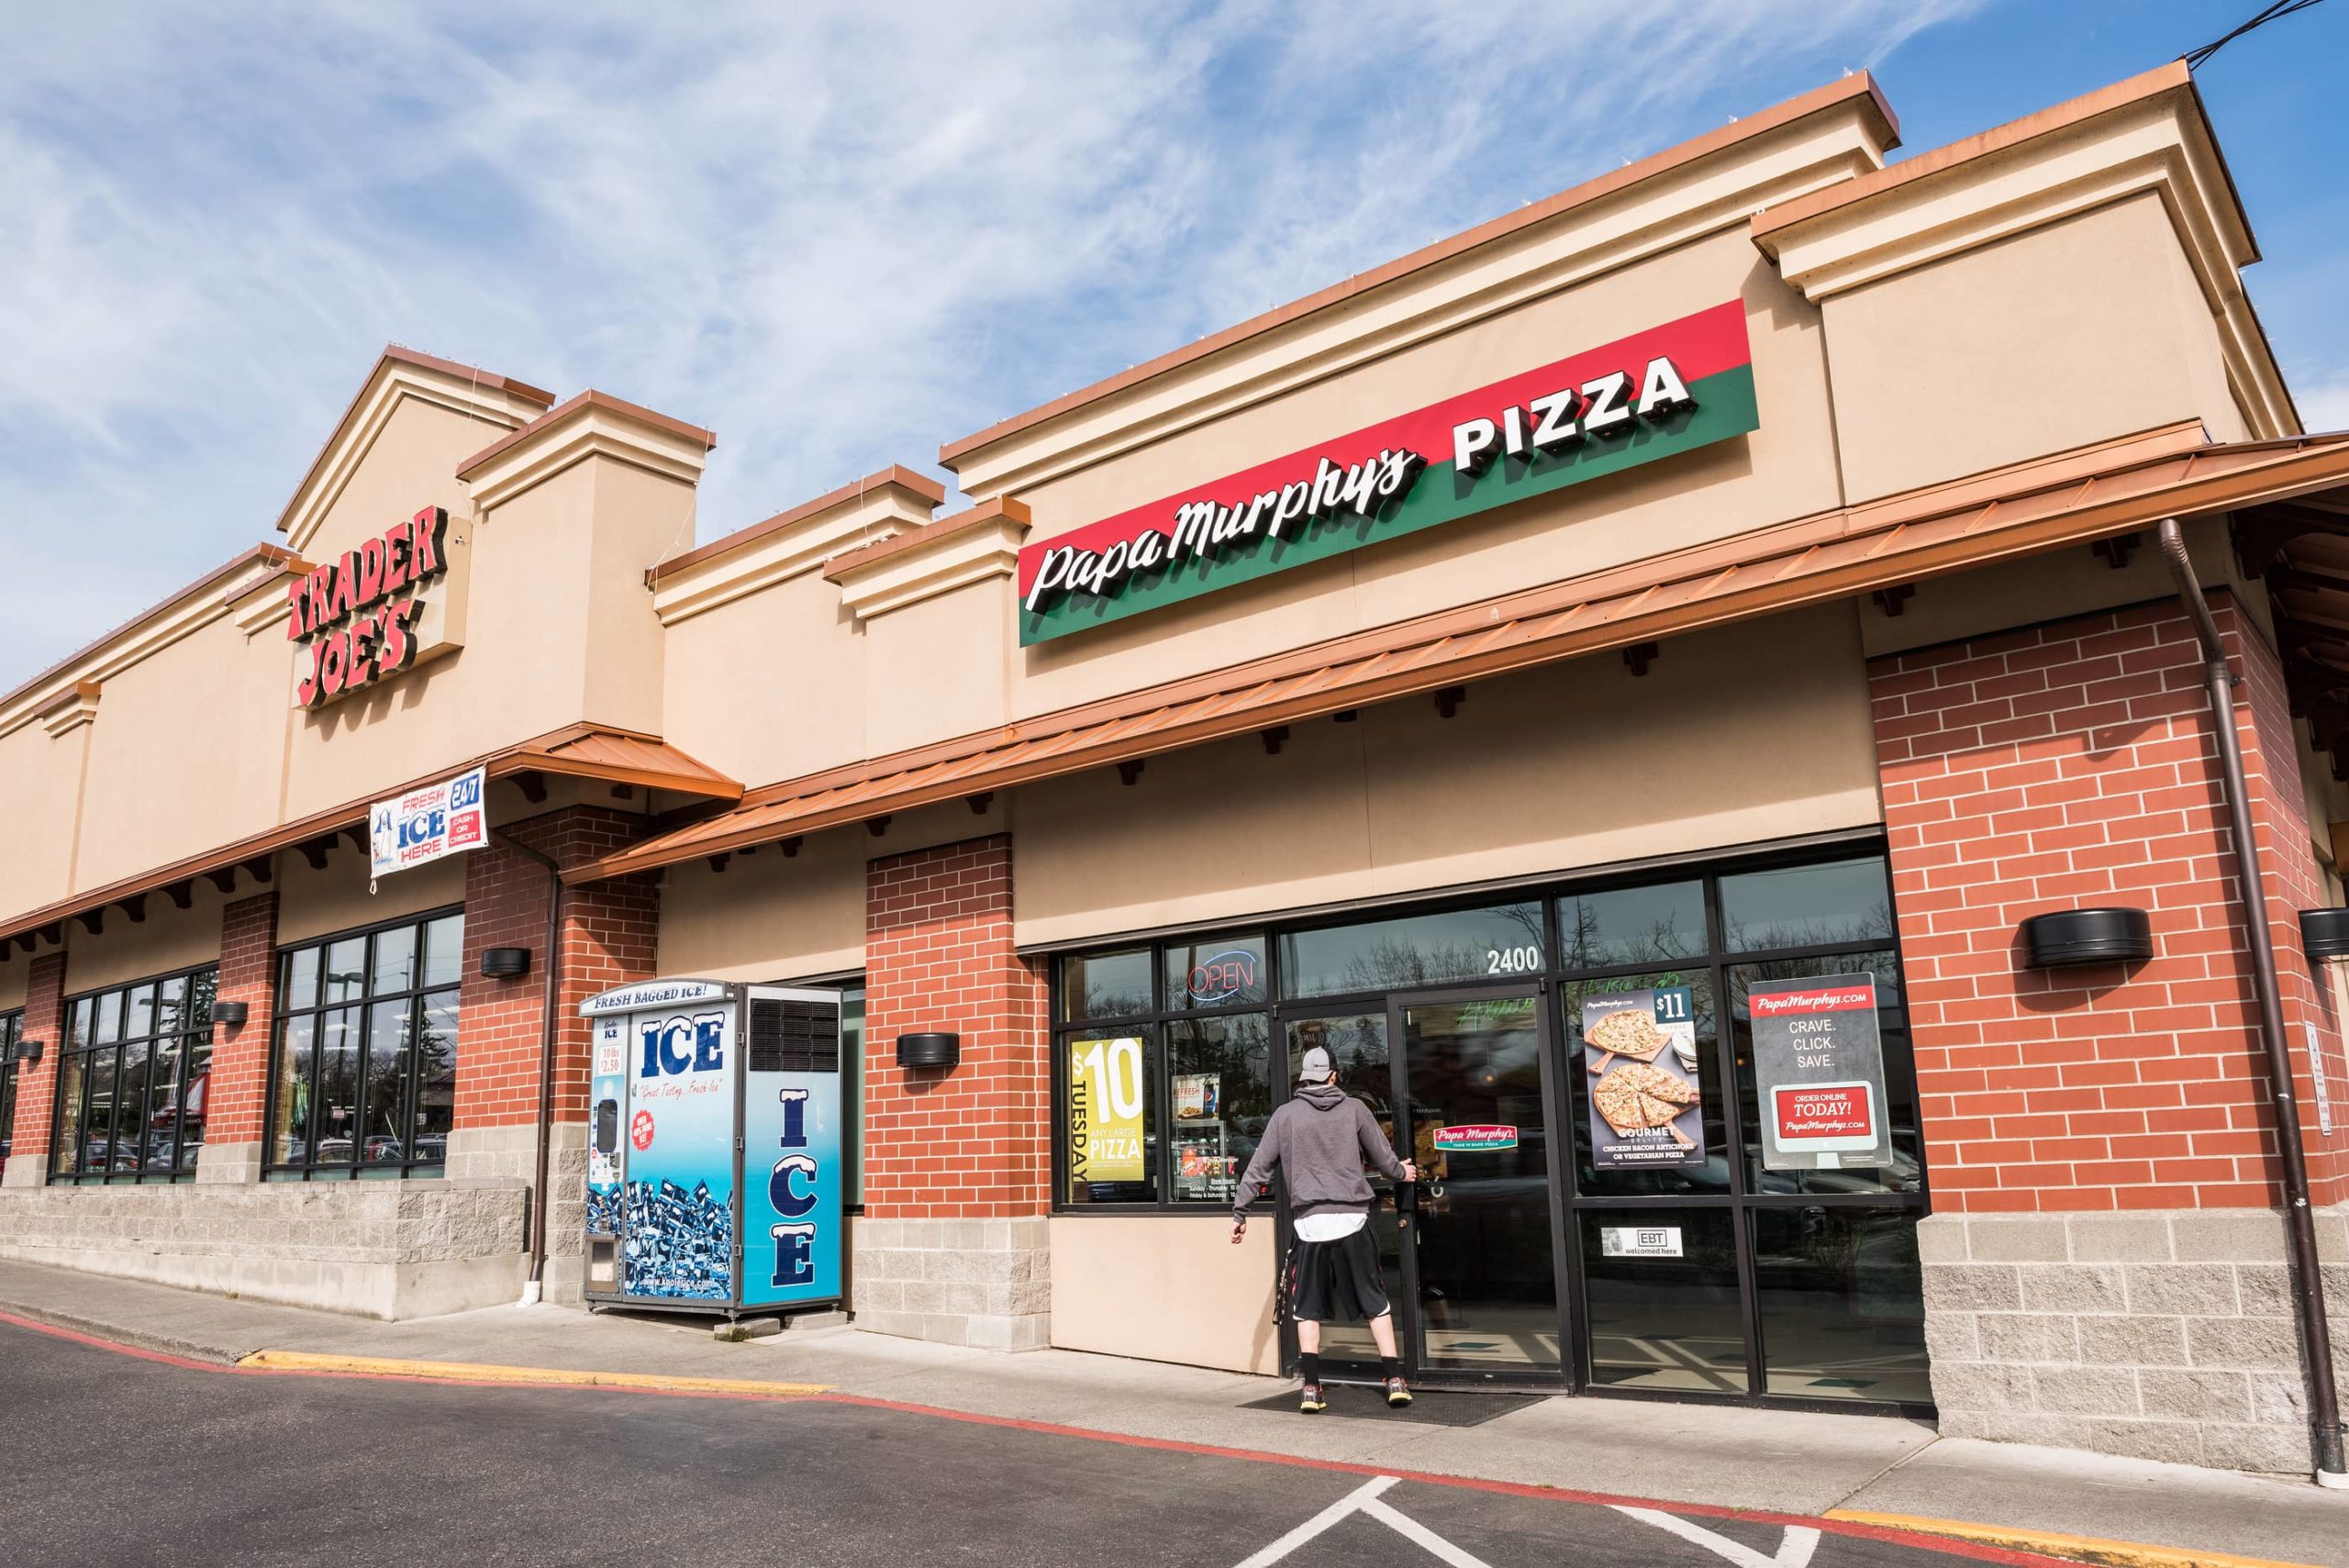 6-year-old California Boy Suffers Kidney Failure after Eating Salad at Pizza Shop